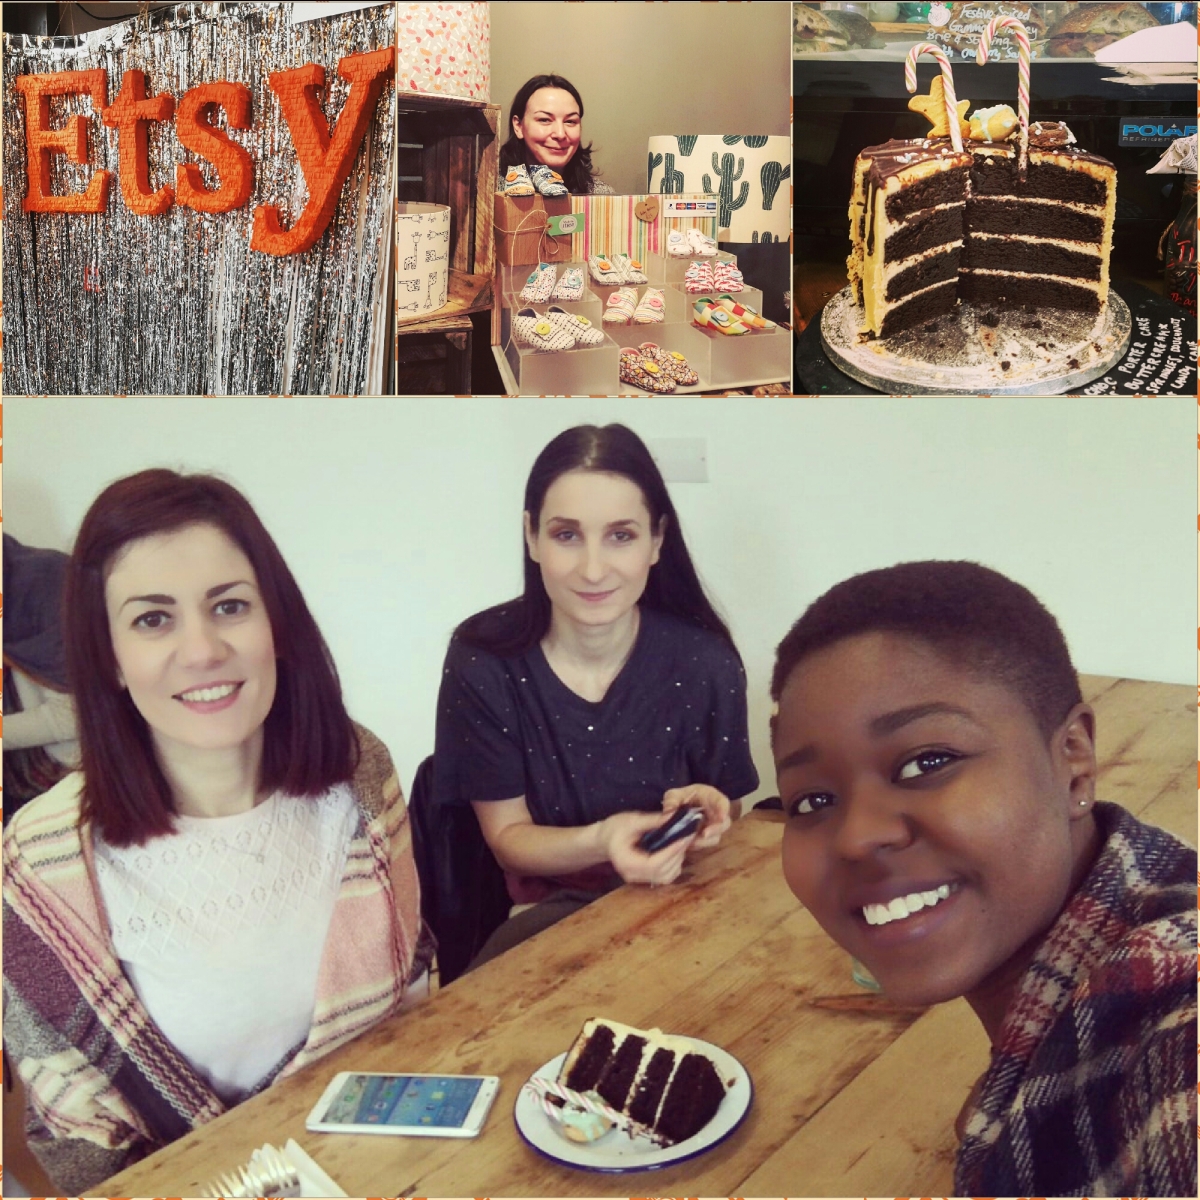 Blogmas day 3- Etsy festive market and tea and cake with friends.